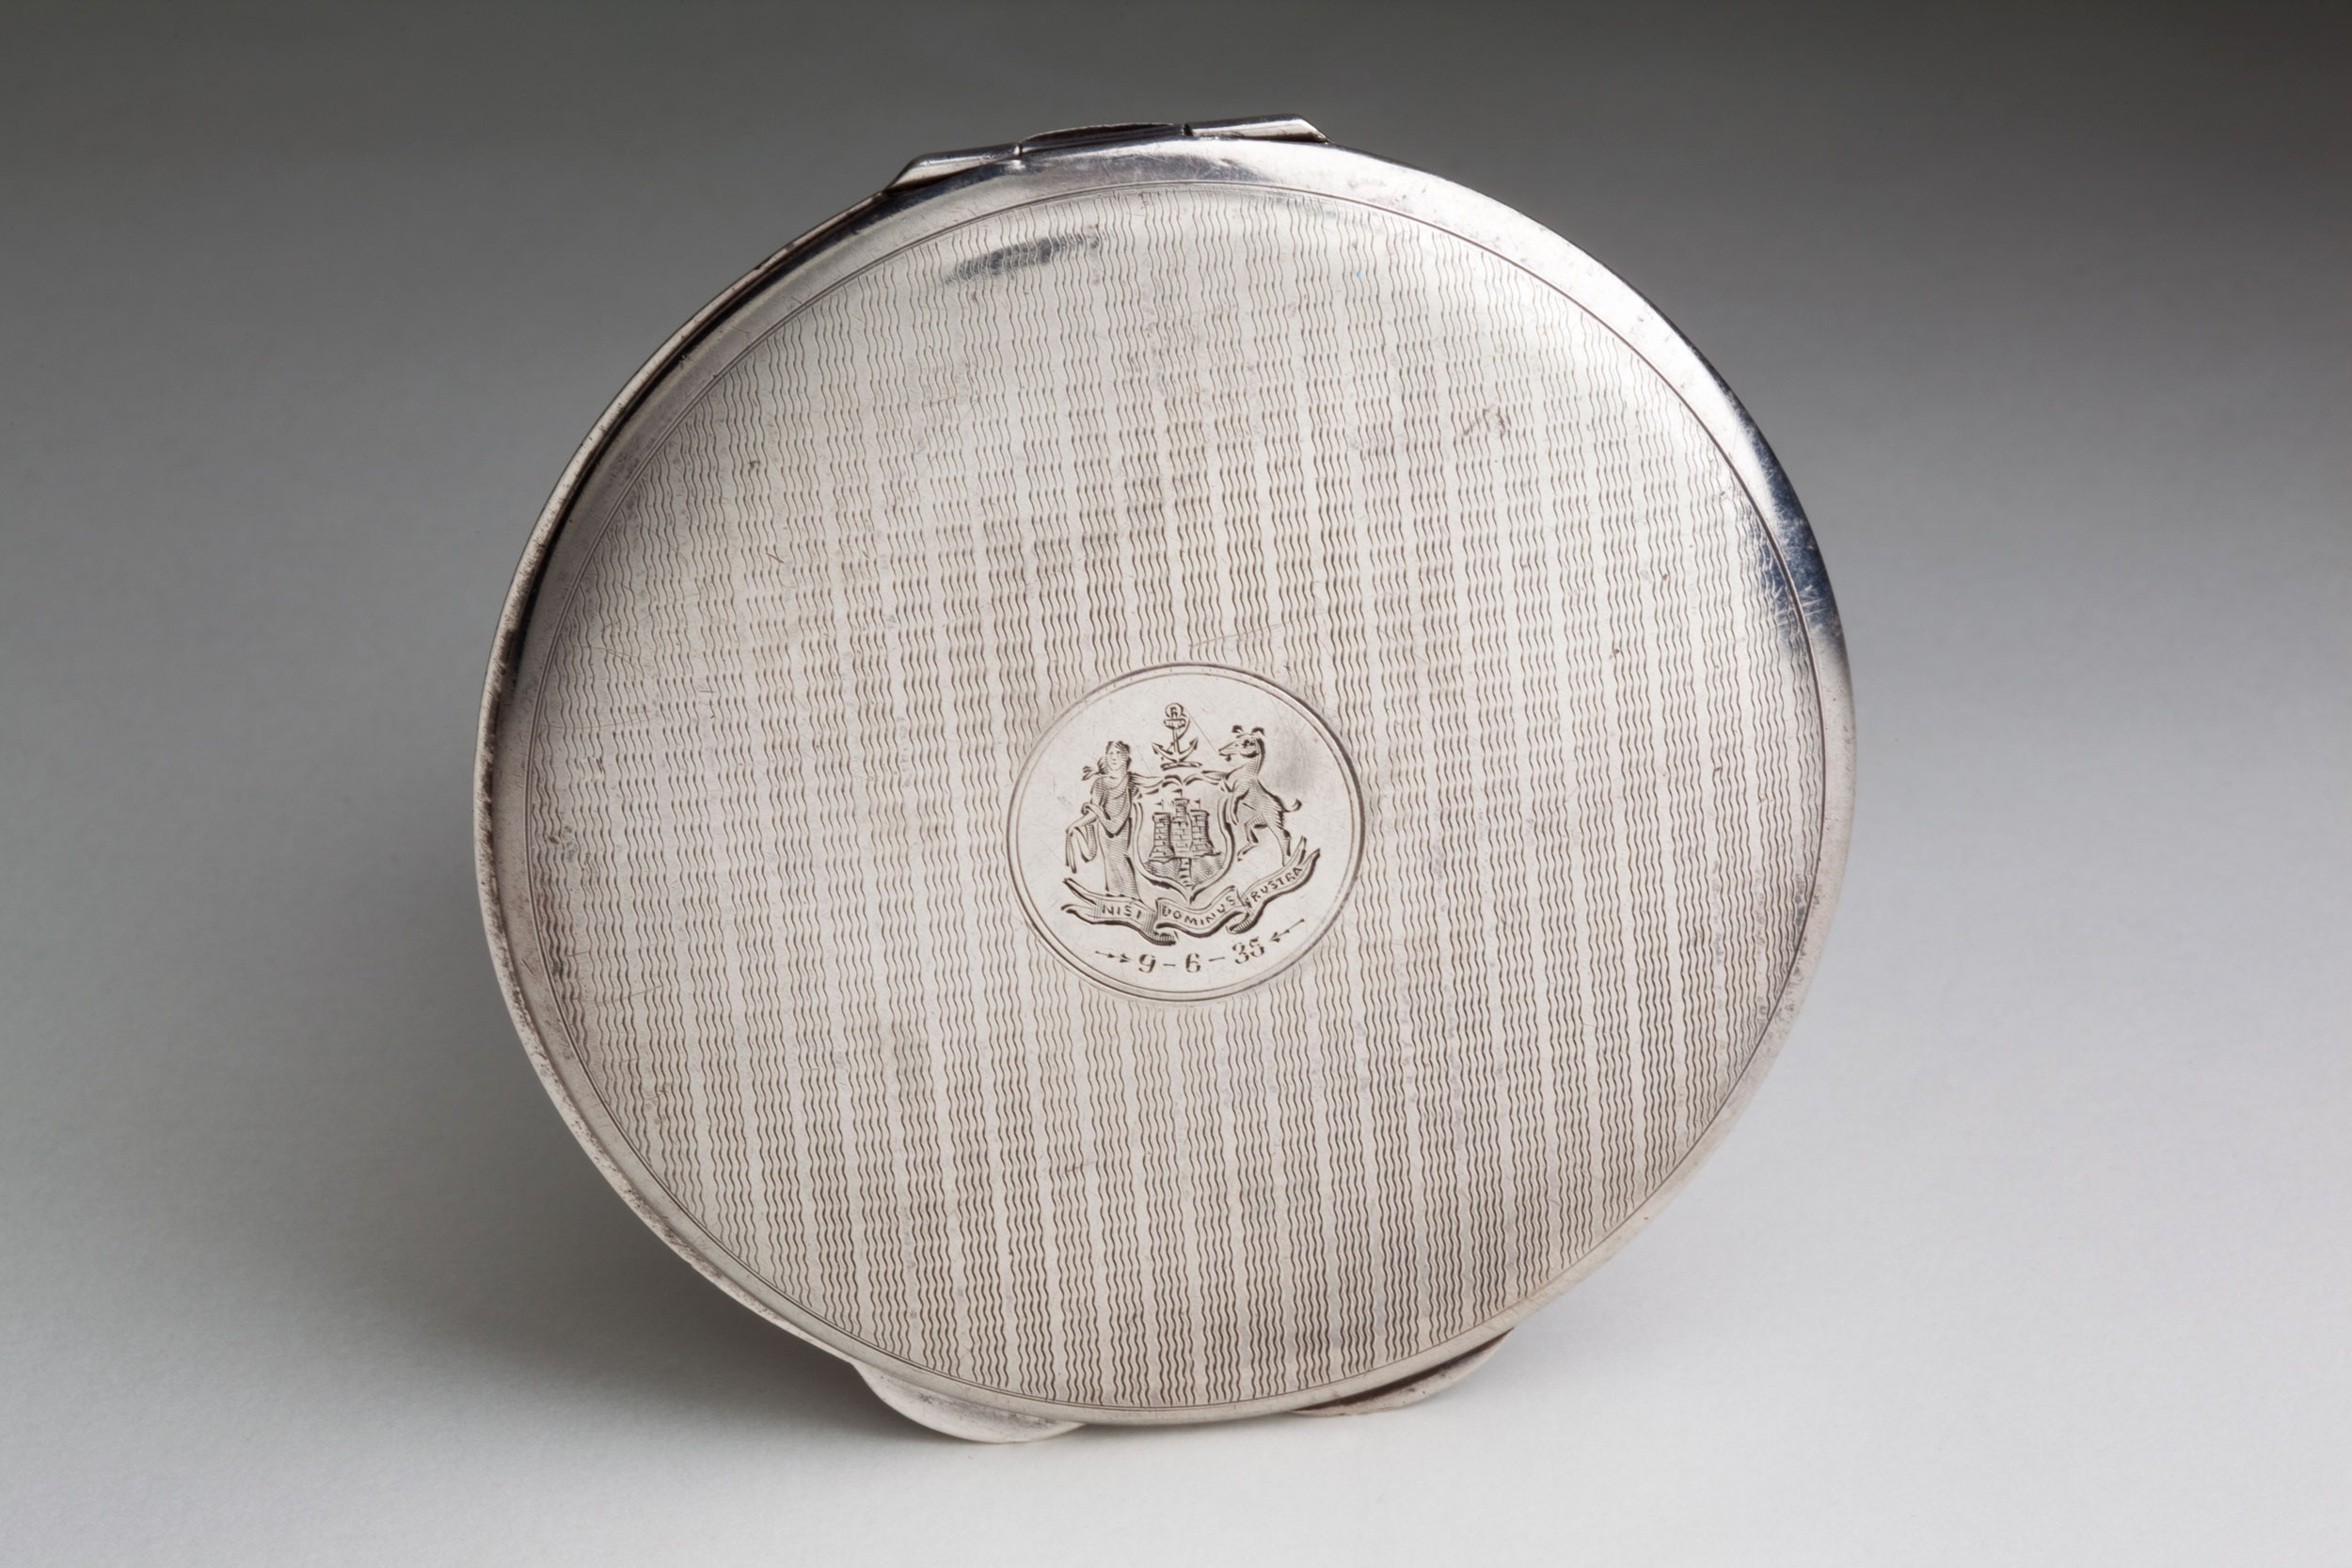 Face powder compact presented to Dame Enid Lyons.